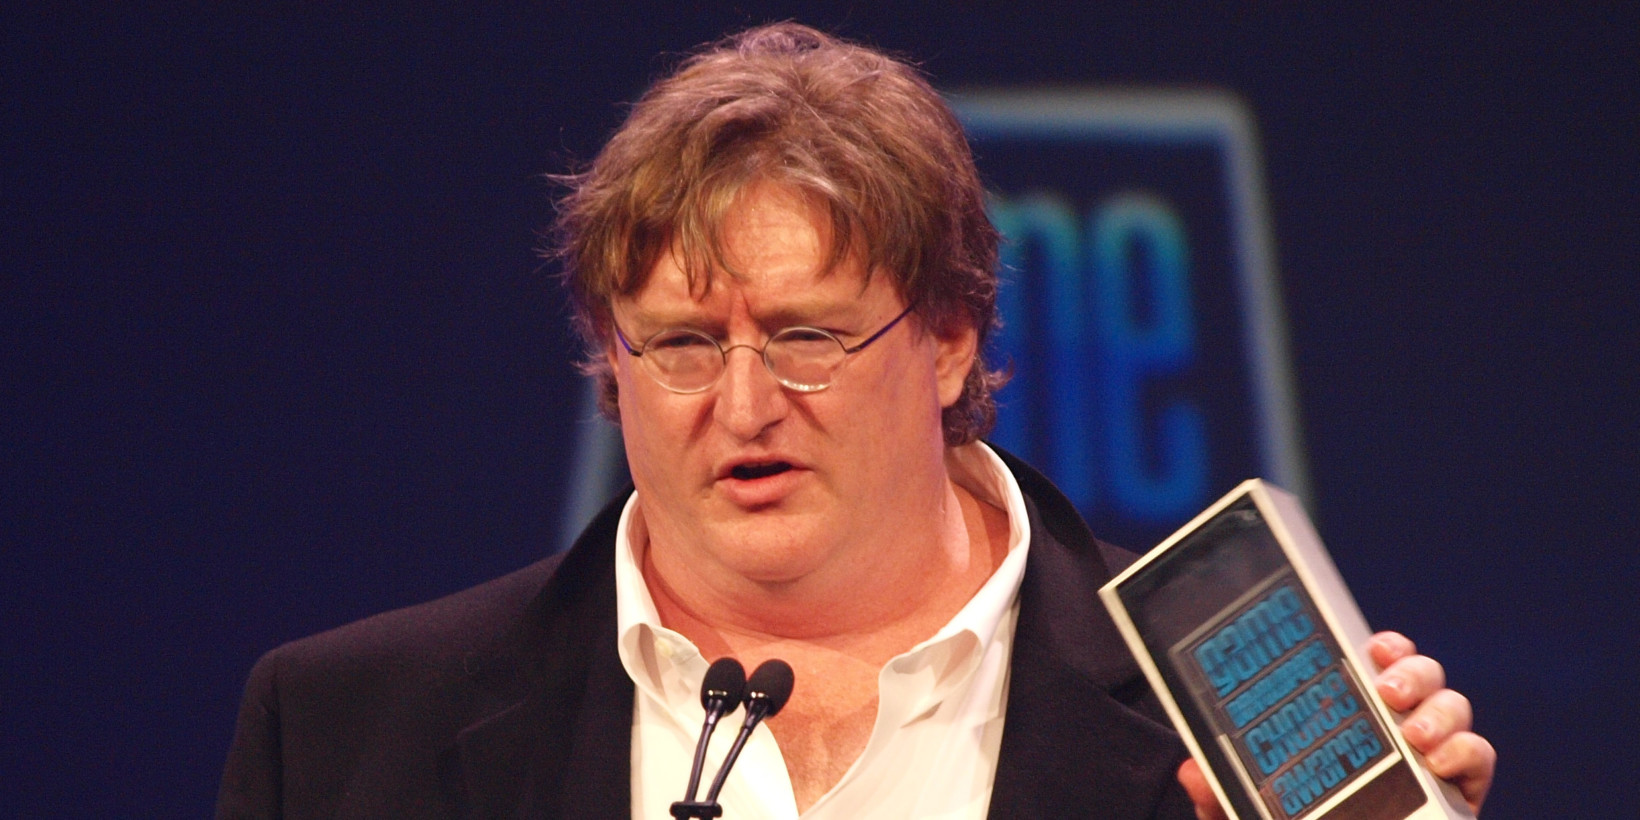 Gabe Newell is doing an AMA today so you can ask him about Half-Life 3 -  Polygon